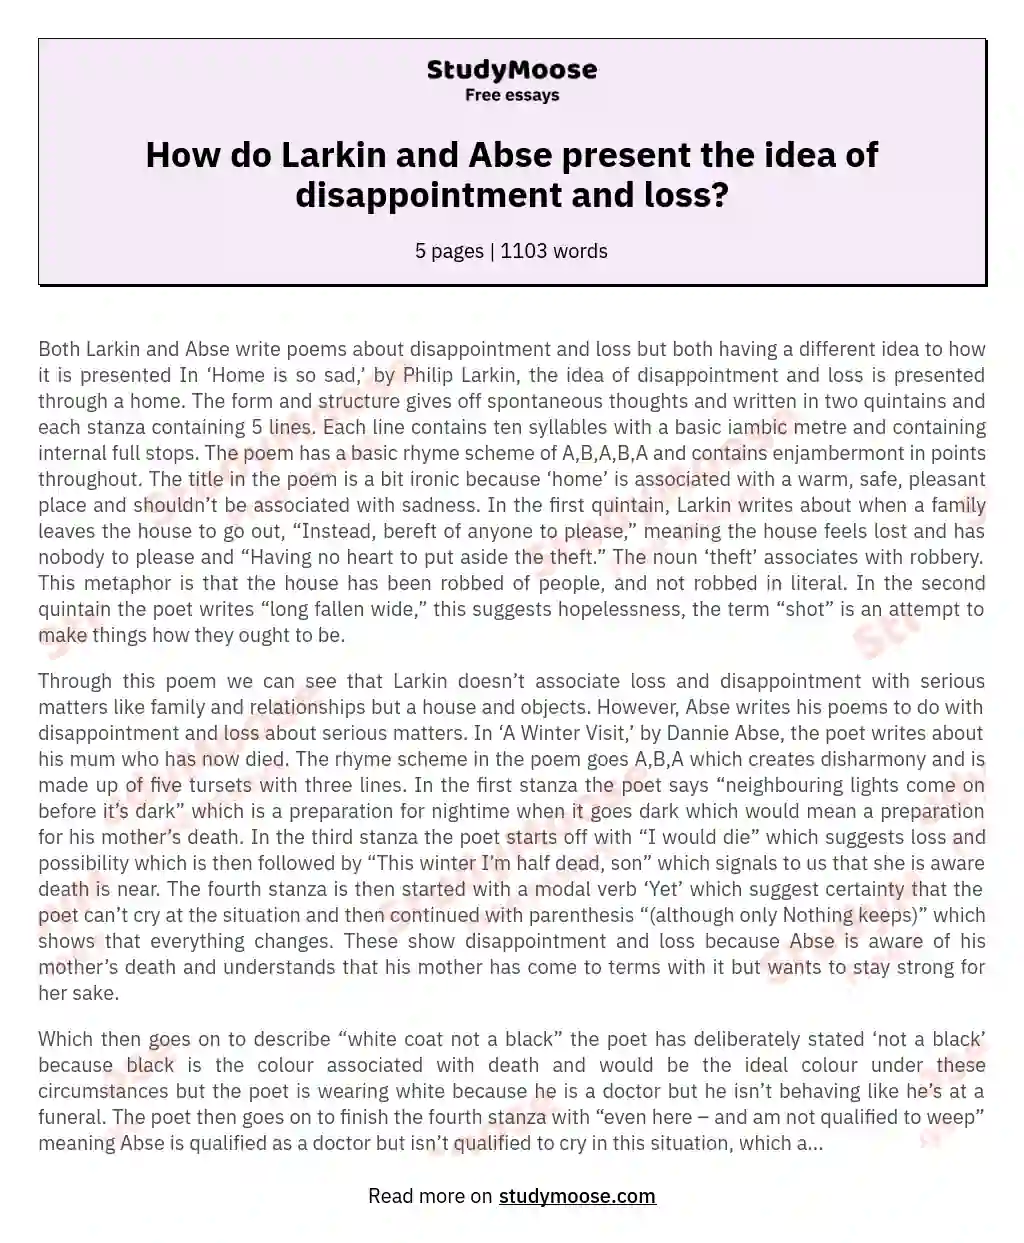 How do Larkin and Abse present the idea of disappointment and loss? essay